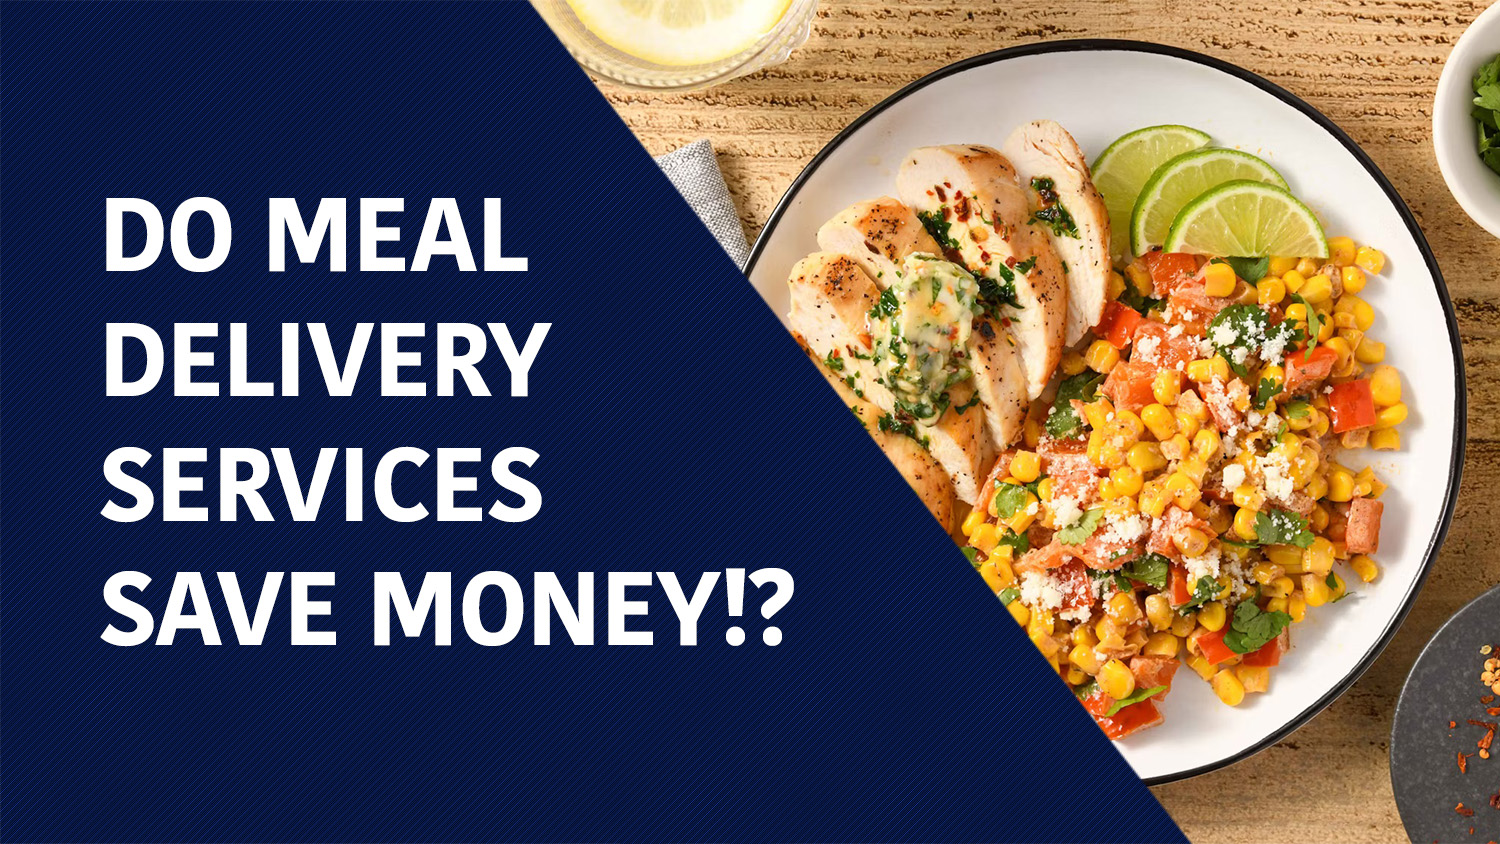 Are meal kits worth it? Compare the cost of meal delivery vs groceries